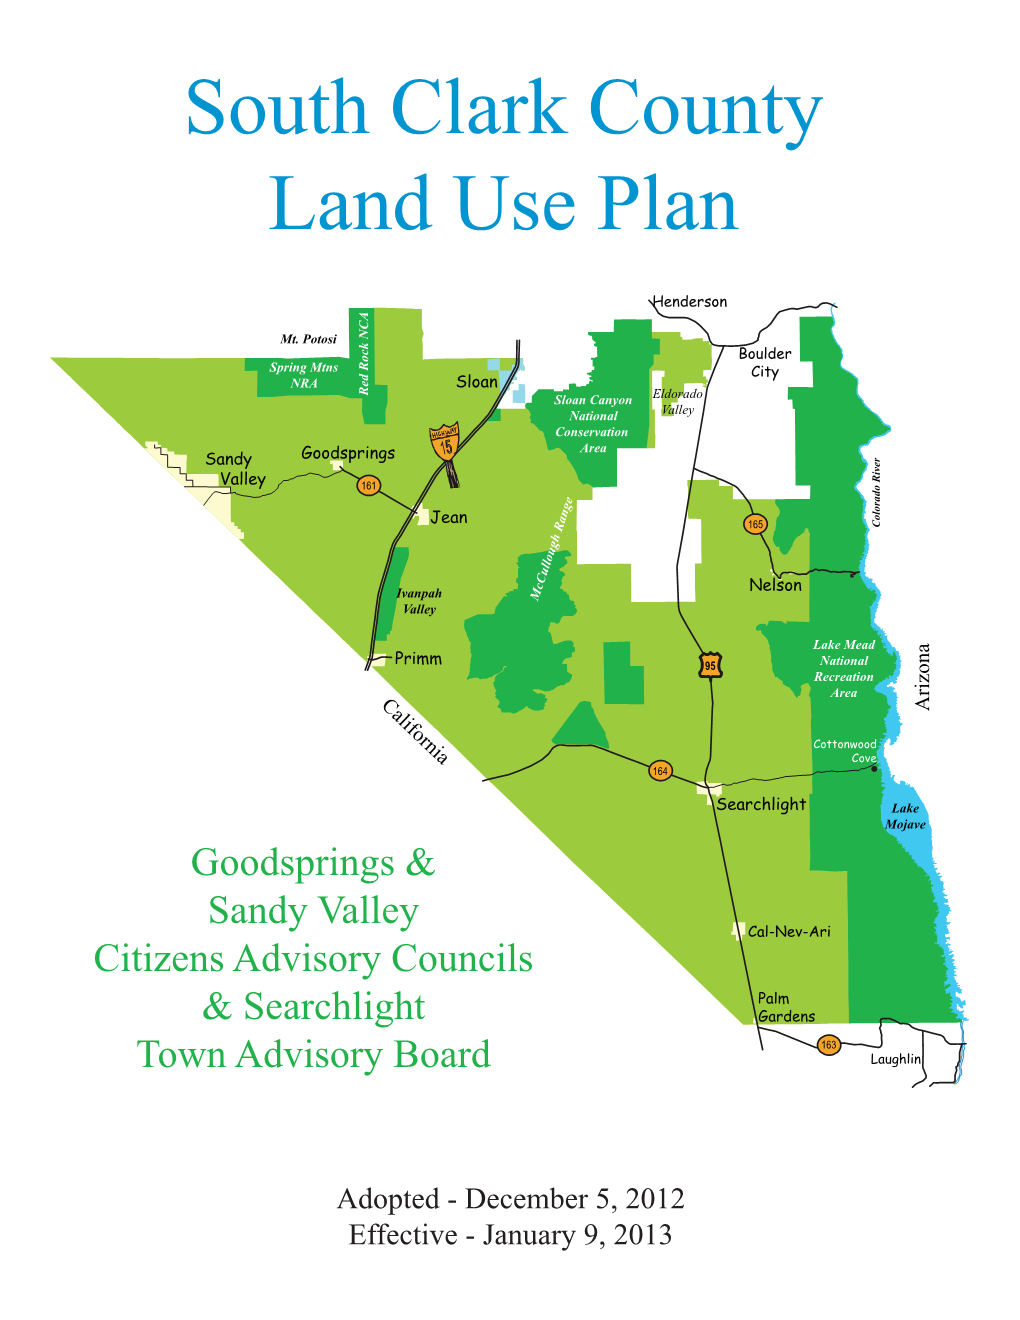 South Clark County Land Use Plan